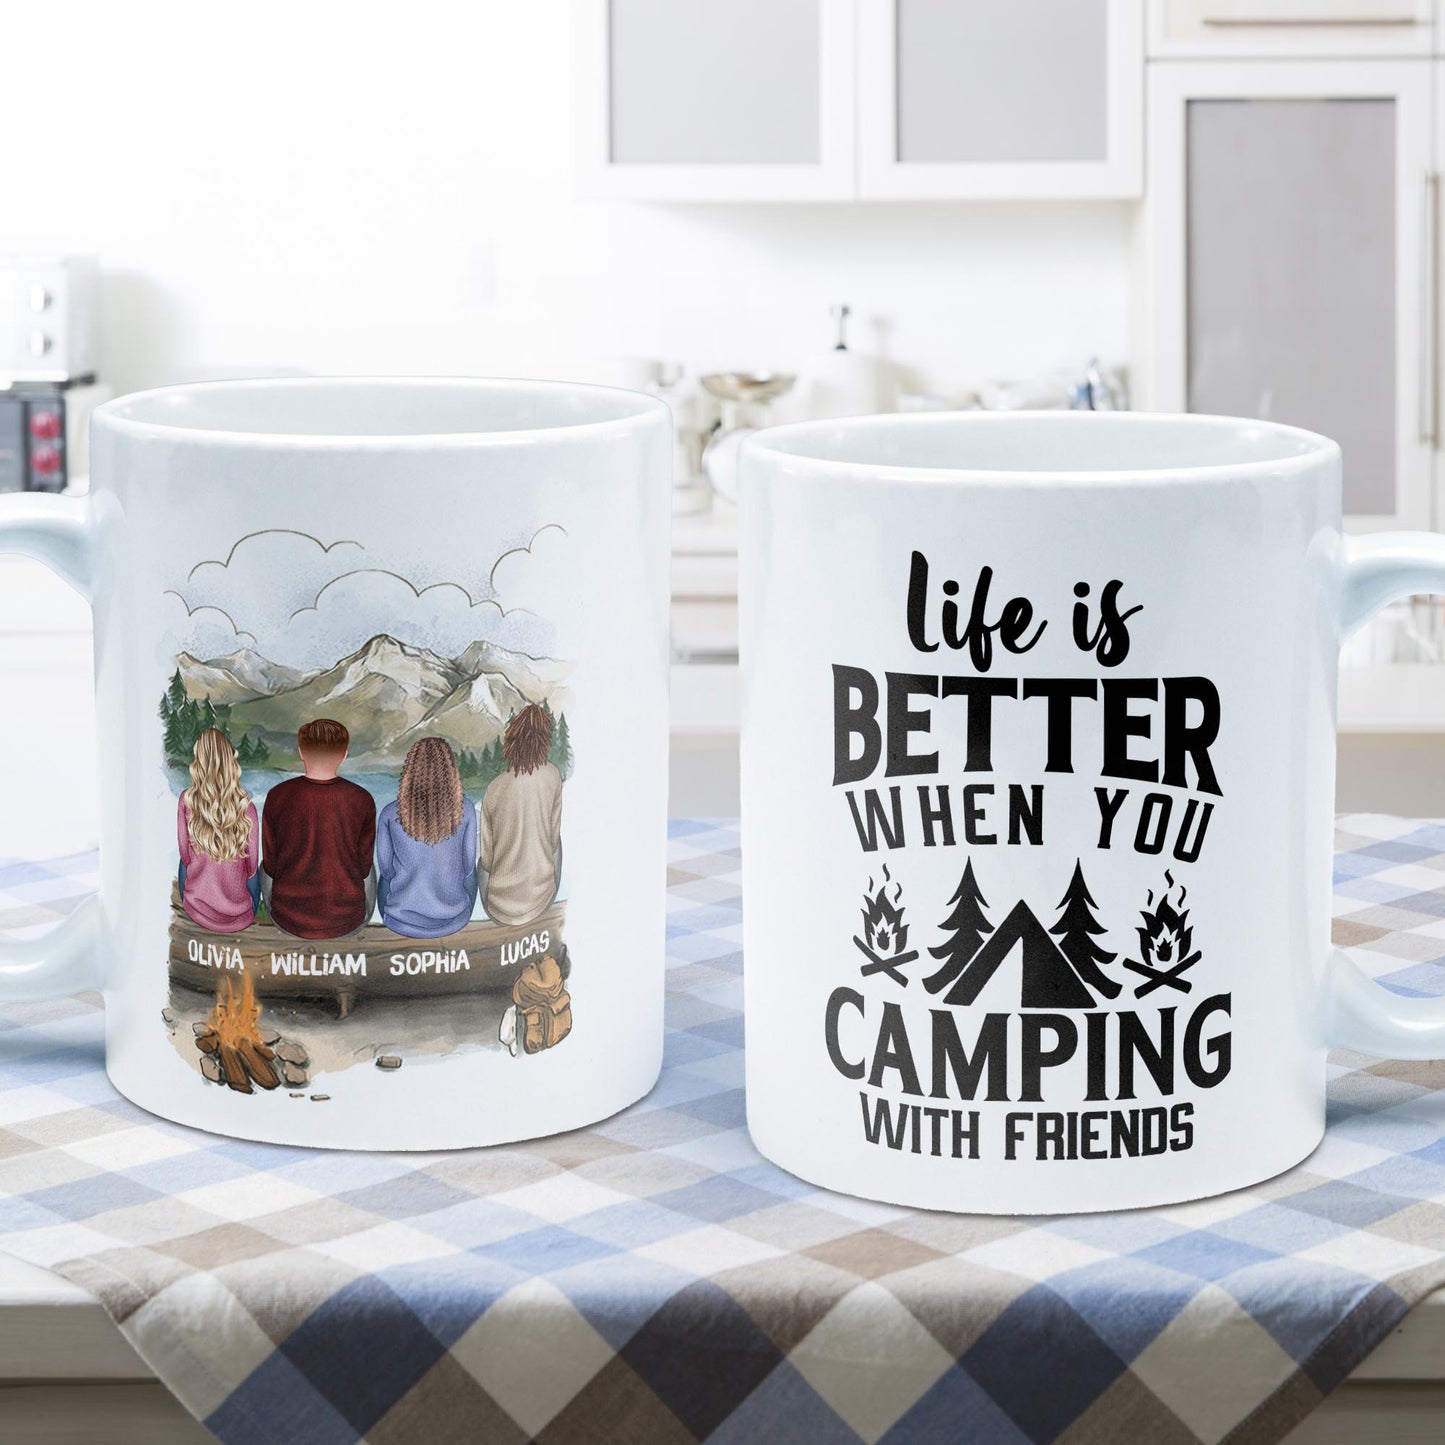 Life Is Better When You Camping With Friends - Personalized Mug - Christmas Gift For Camping Friends, camper